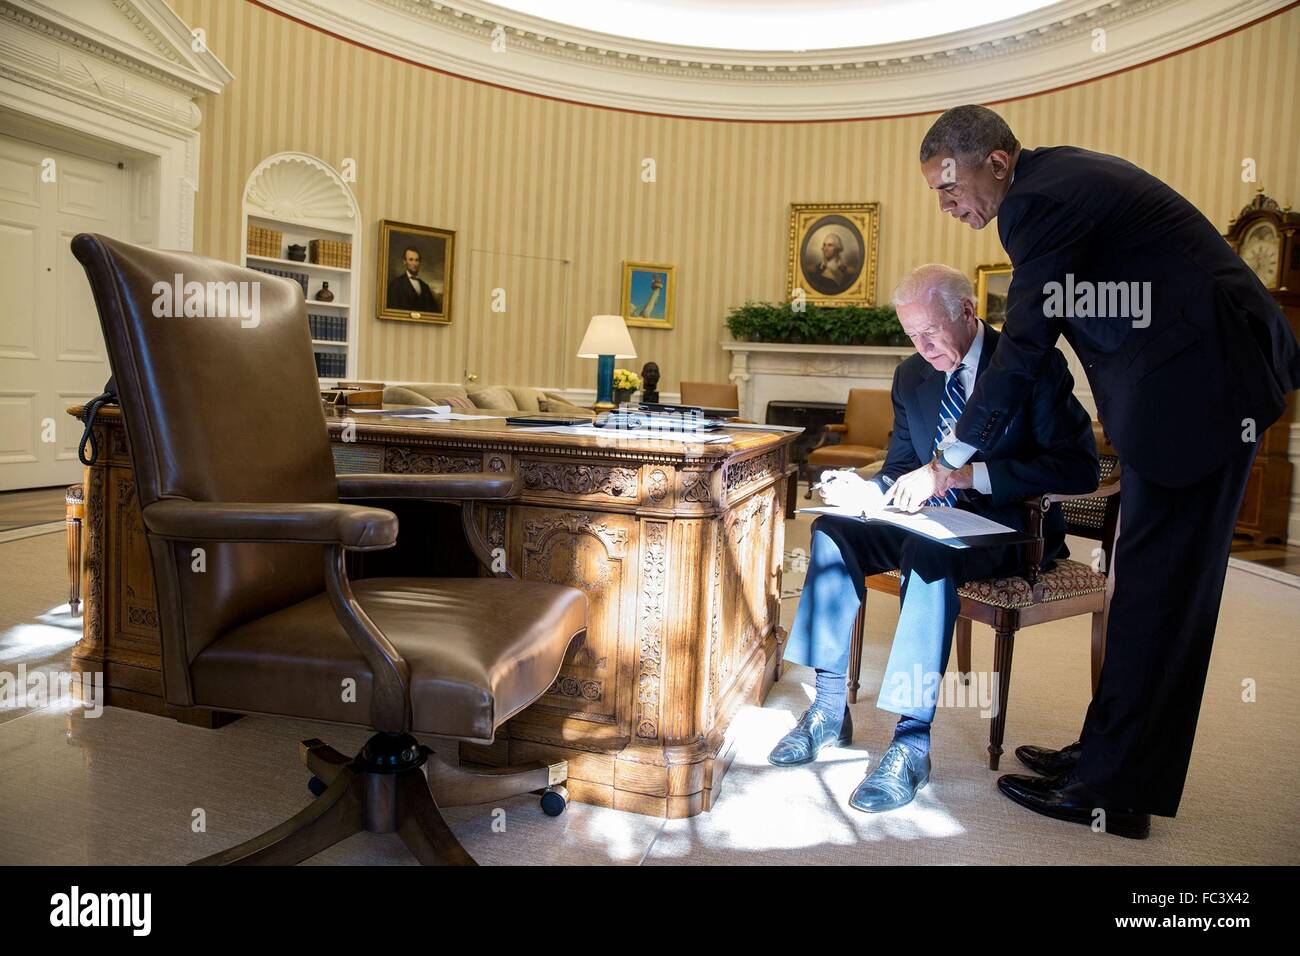 U.S President Barack Obama reviews a statement with Vice President Joe Biden in the Oval Office of the White House October 21, 2015 in Washington, DC. The statement was Biden's announcement not to seek the presidency. Stock Photo